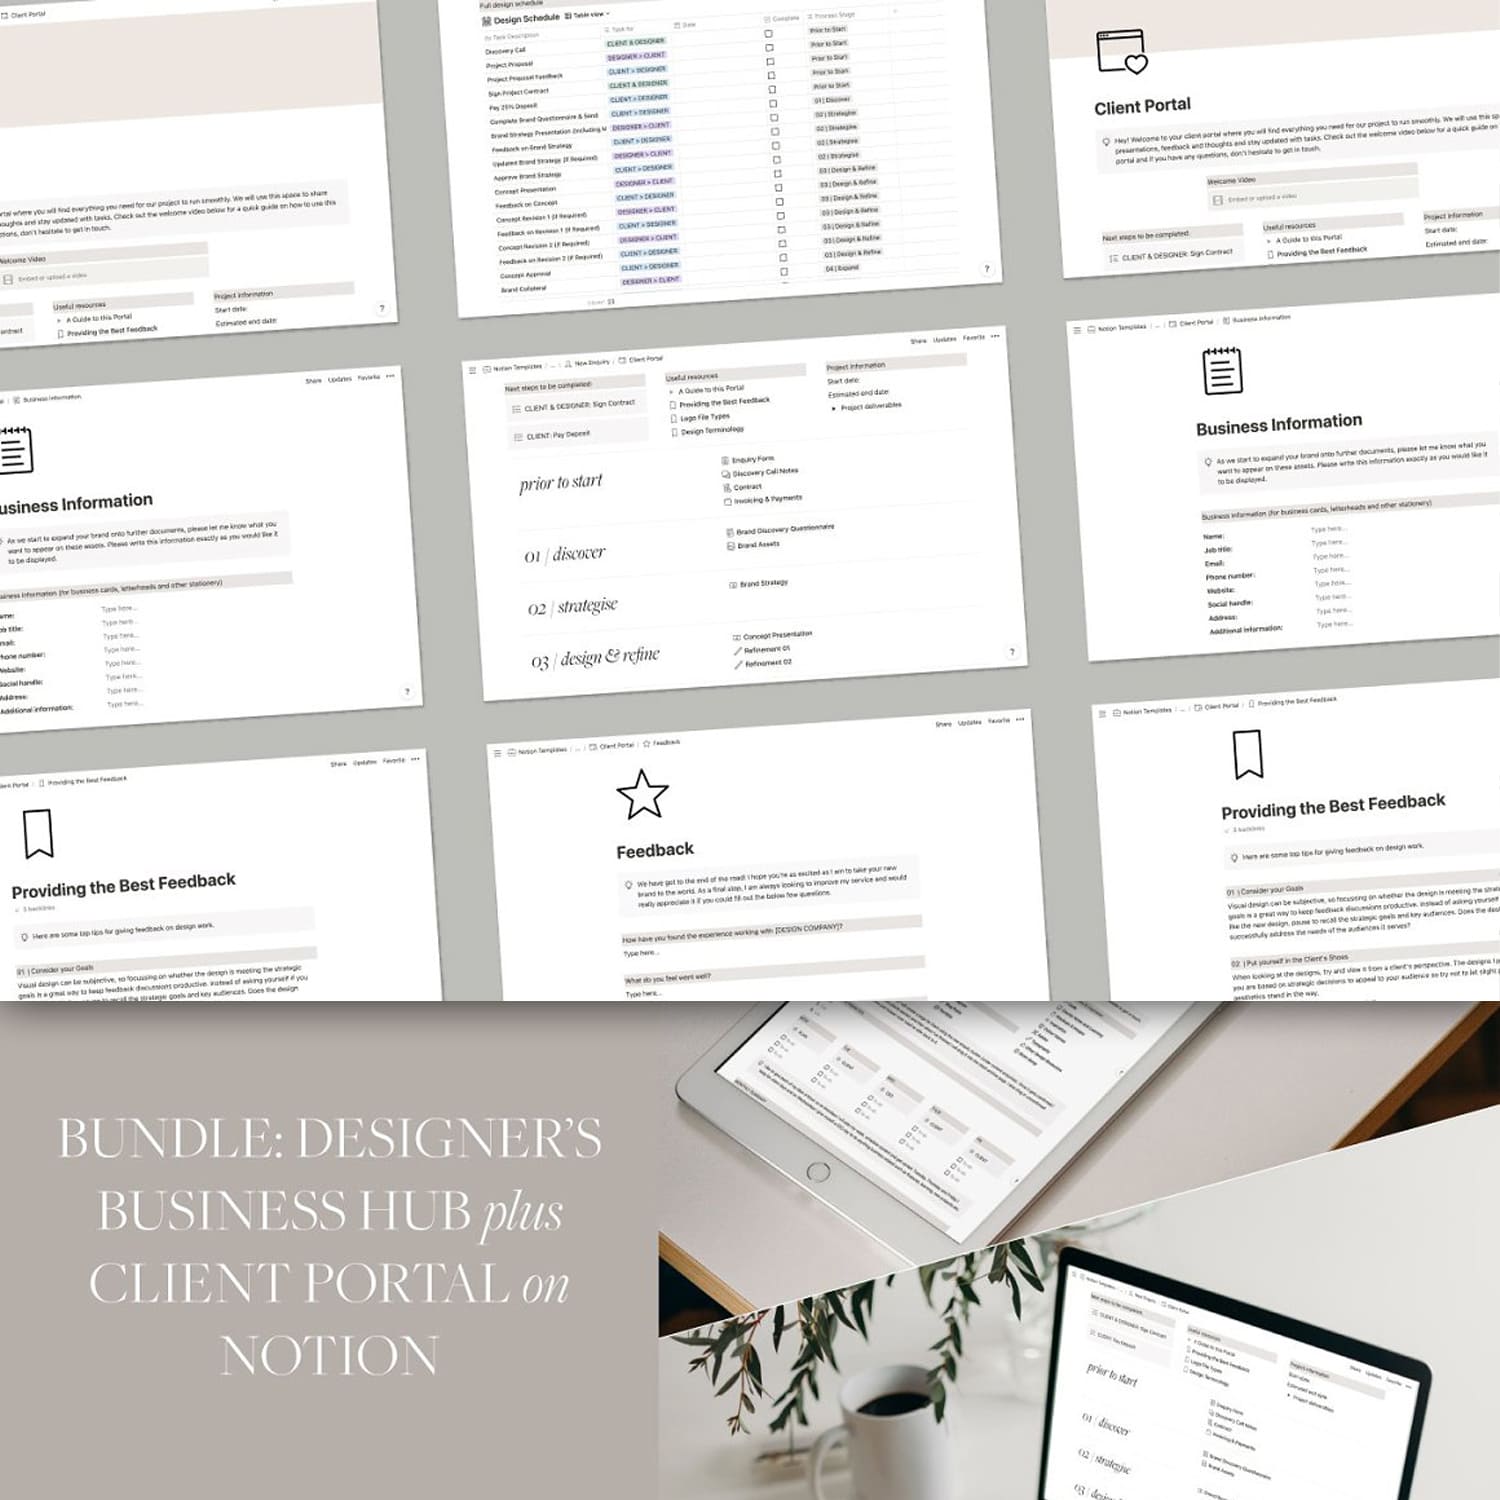 notion bundle for designers with design resources.